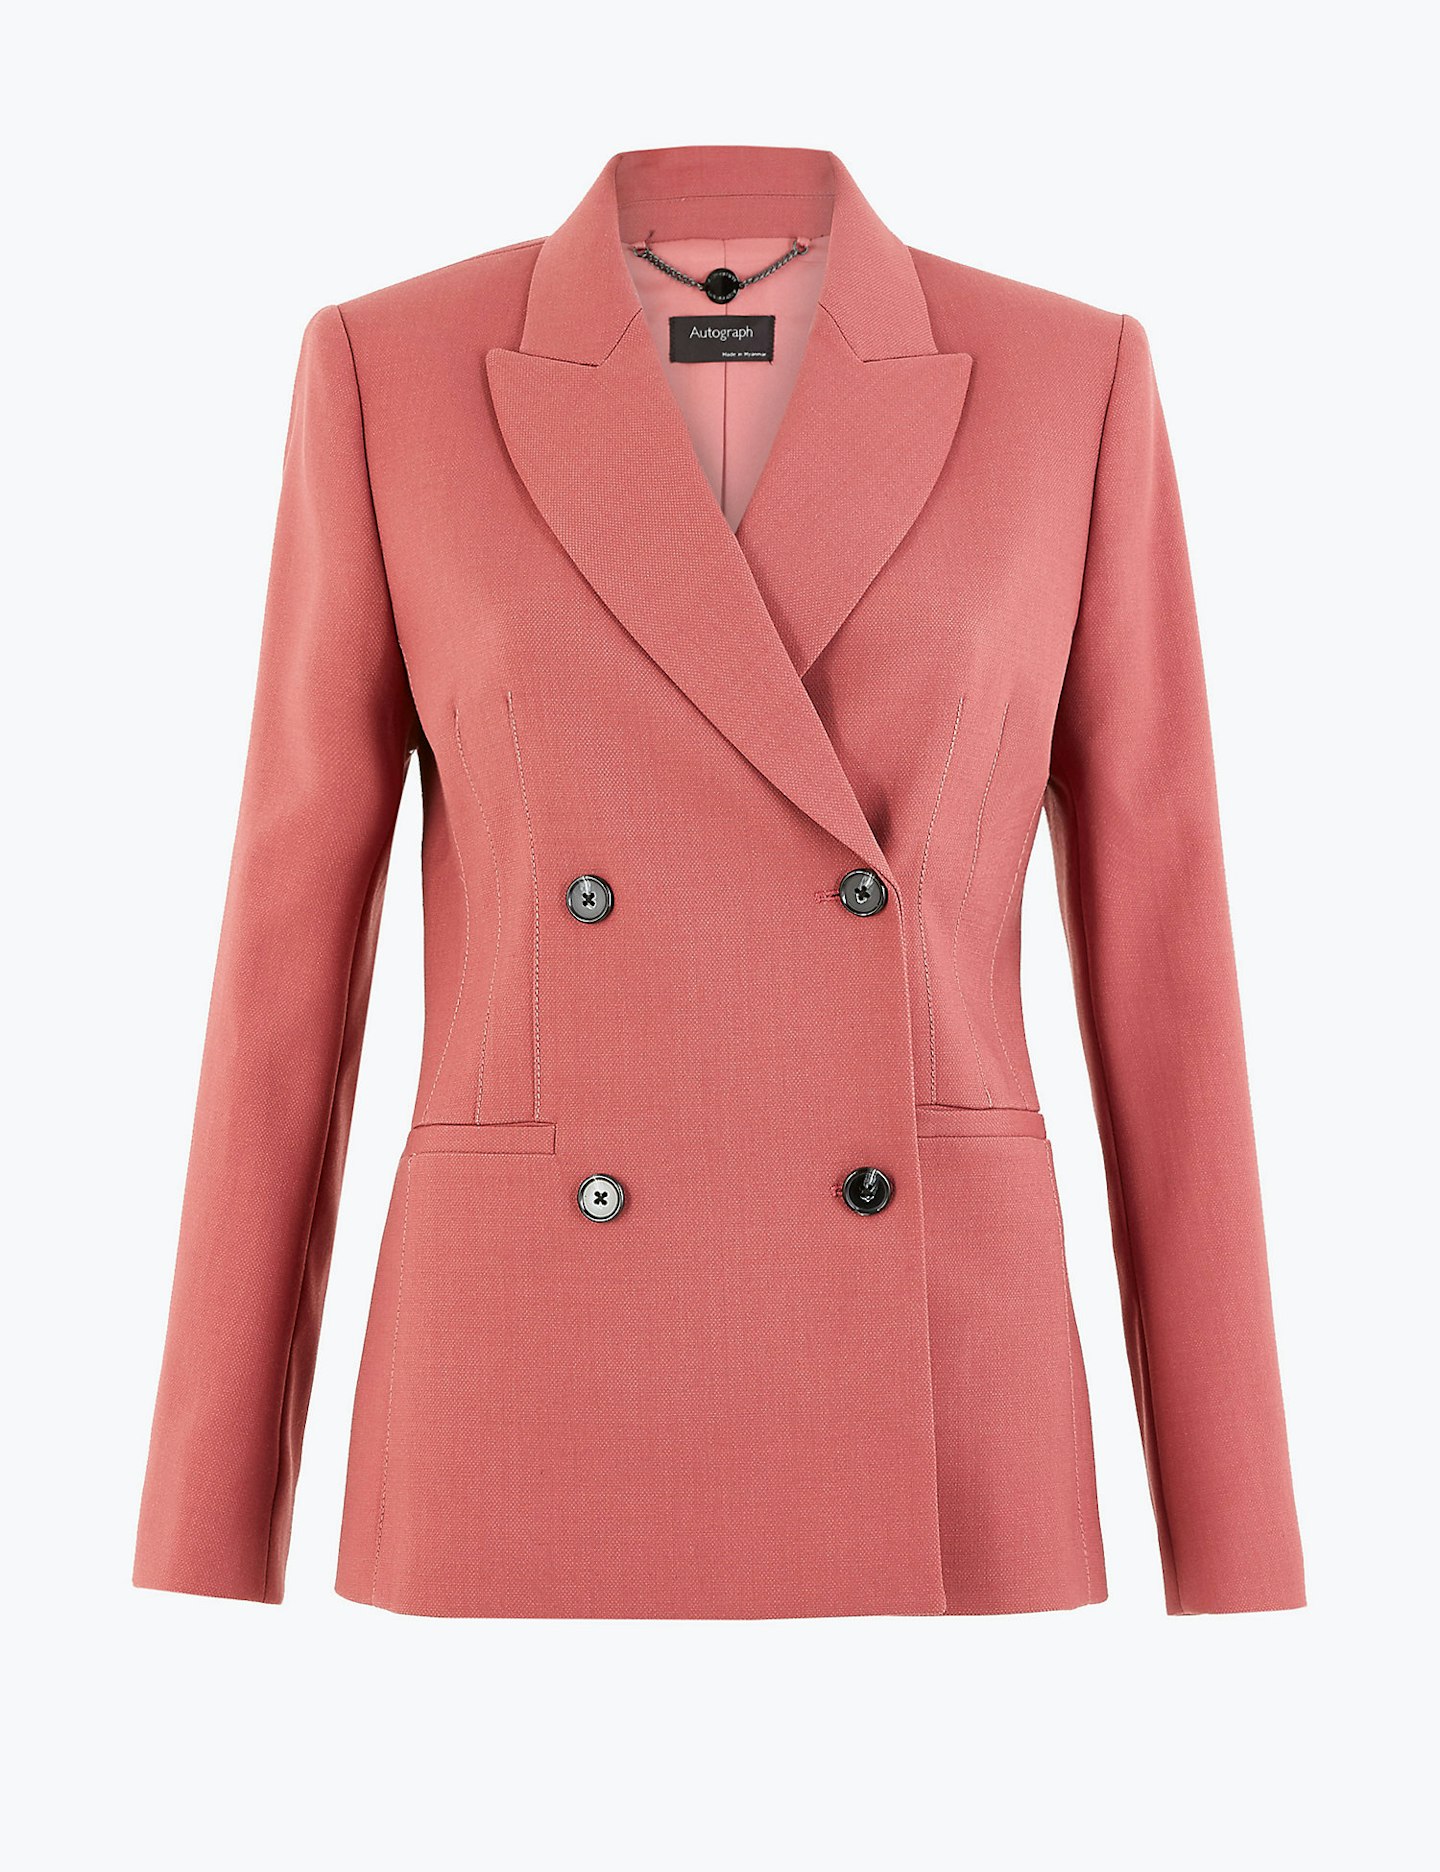 Autograph at M&S, Wool Blend Double Breasted Blazer, £99